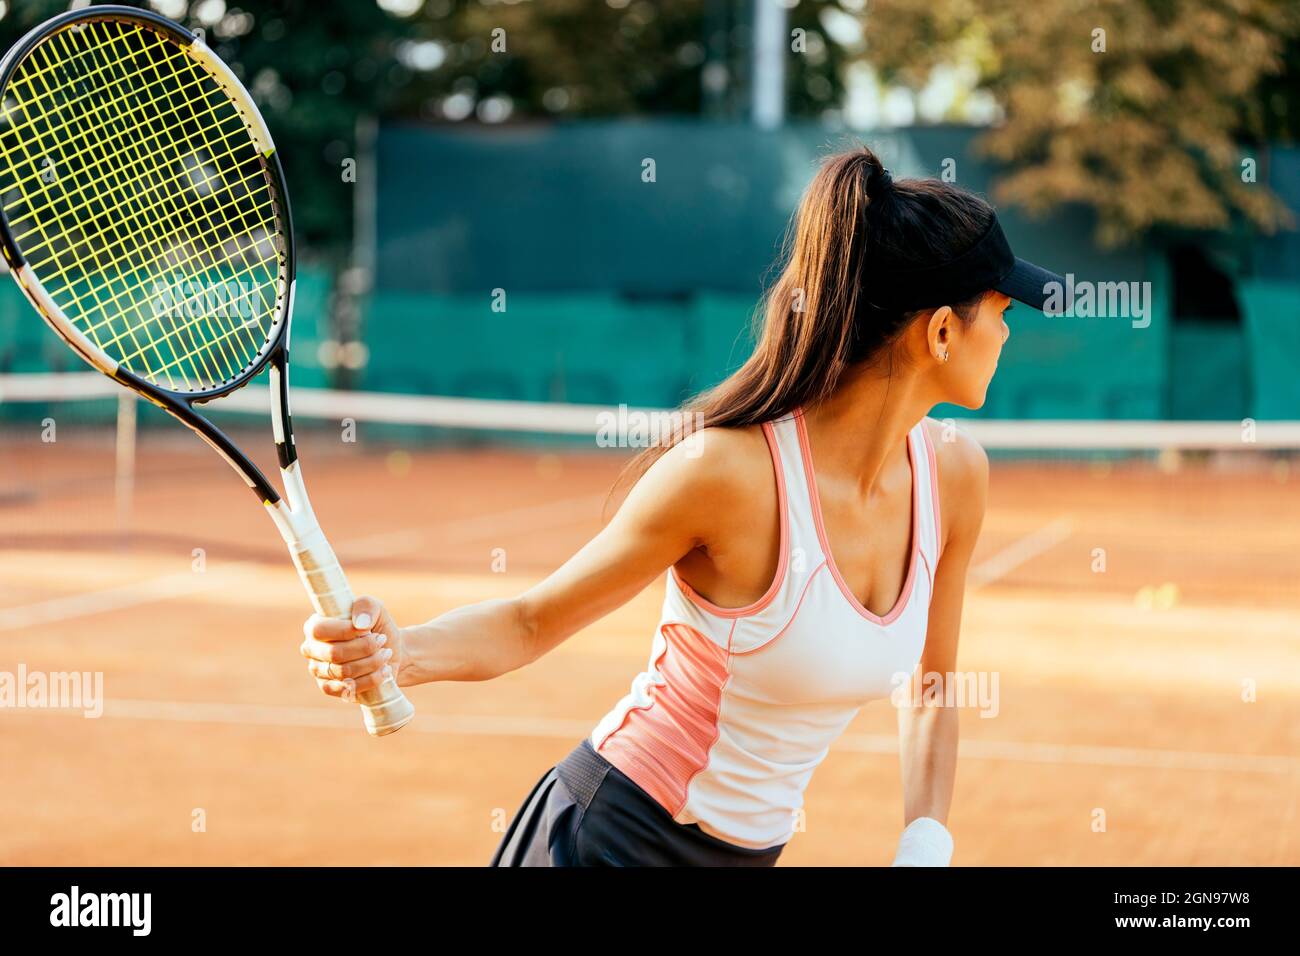 Female sportsperson playing tennis at sports court Stock Photo